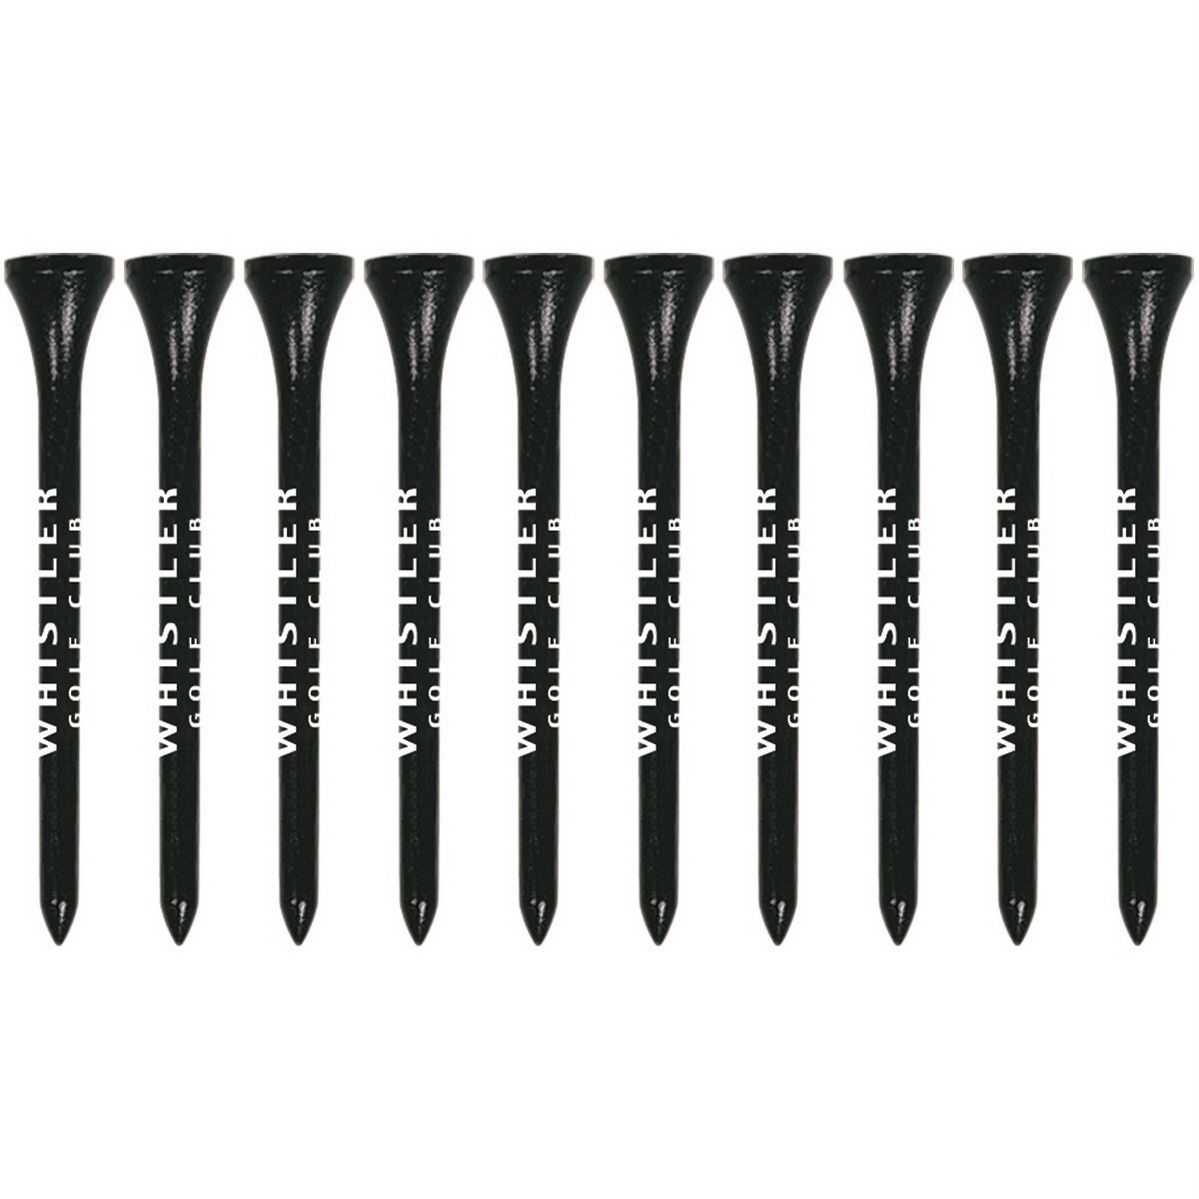 10 Pack of 2.75" Extra-Long Golf Tees